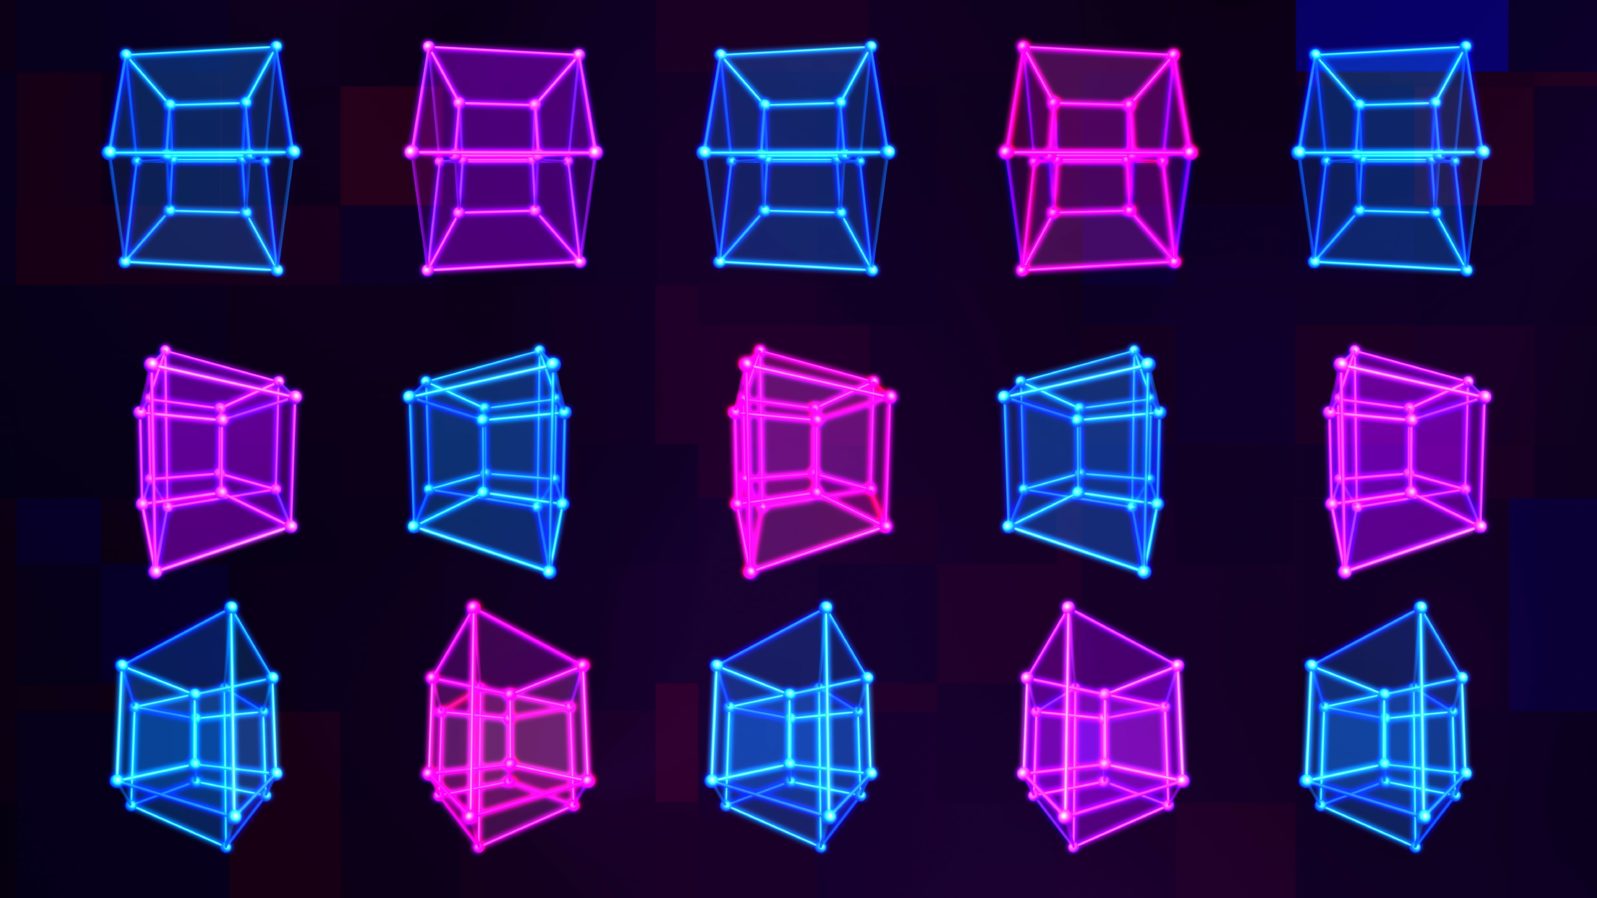 4D Hypercube Tesseract Array Matrix with Trippy Visual Neon Colors - Abstract Background Texture